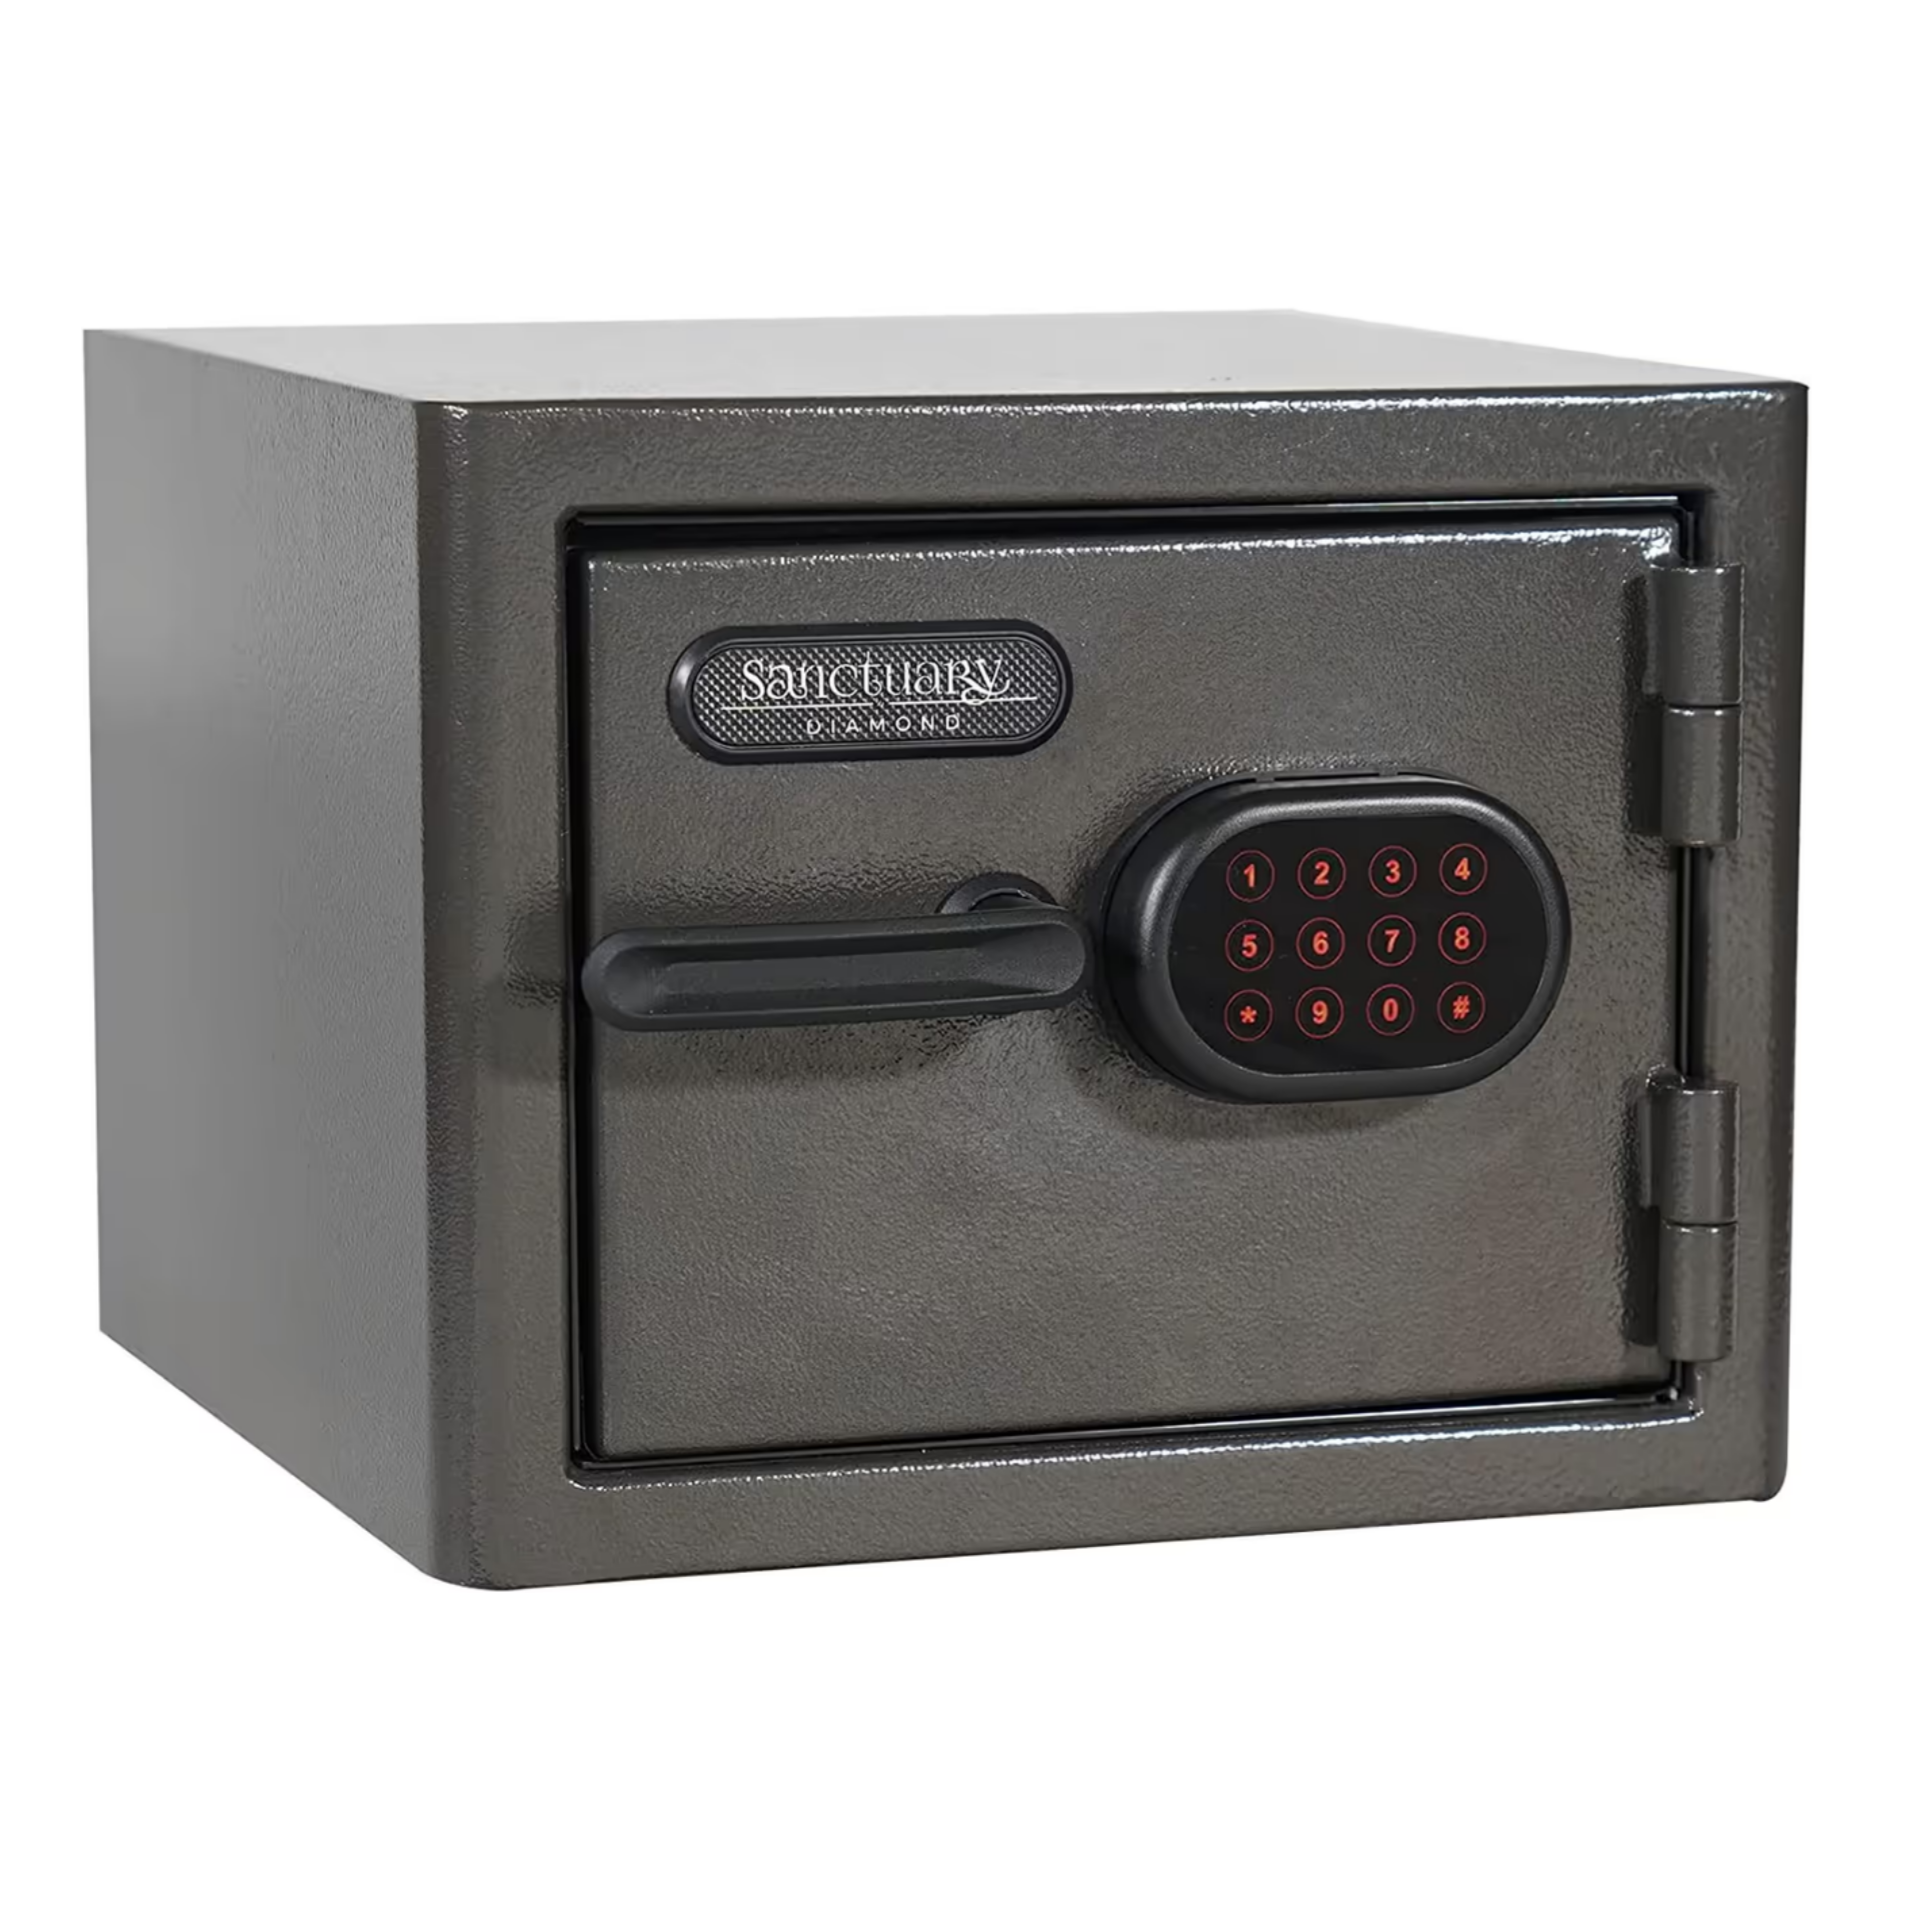 11.5" Tall Safe, Electronic Lock-0.75cft